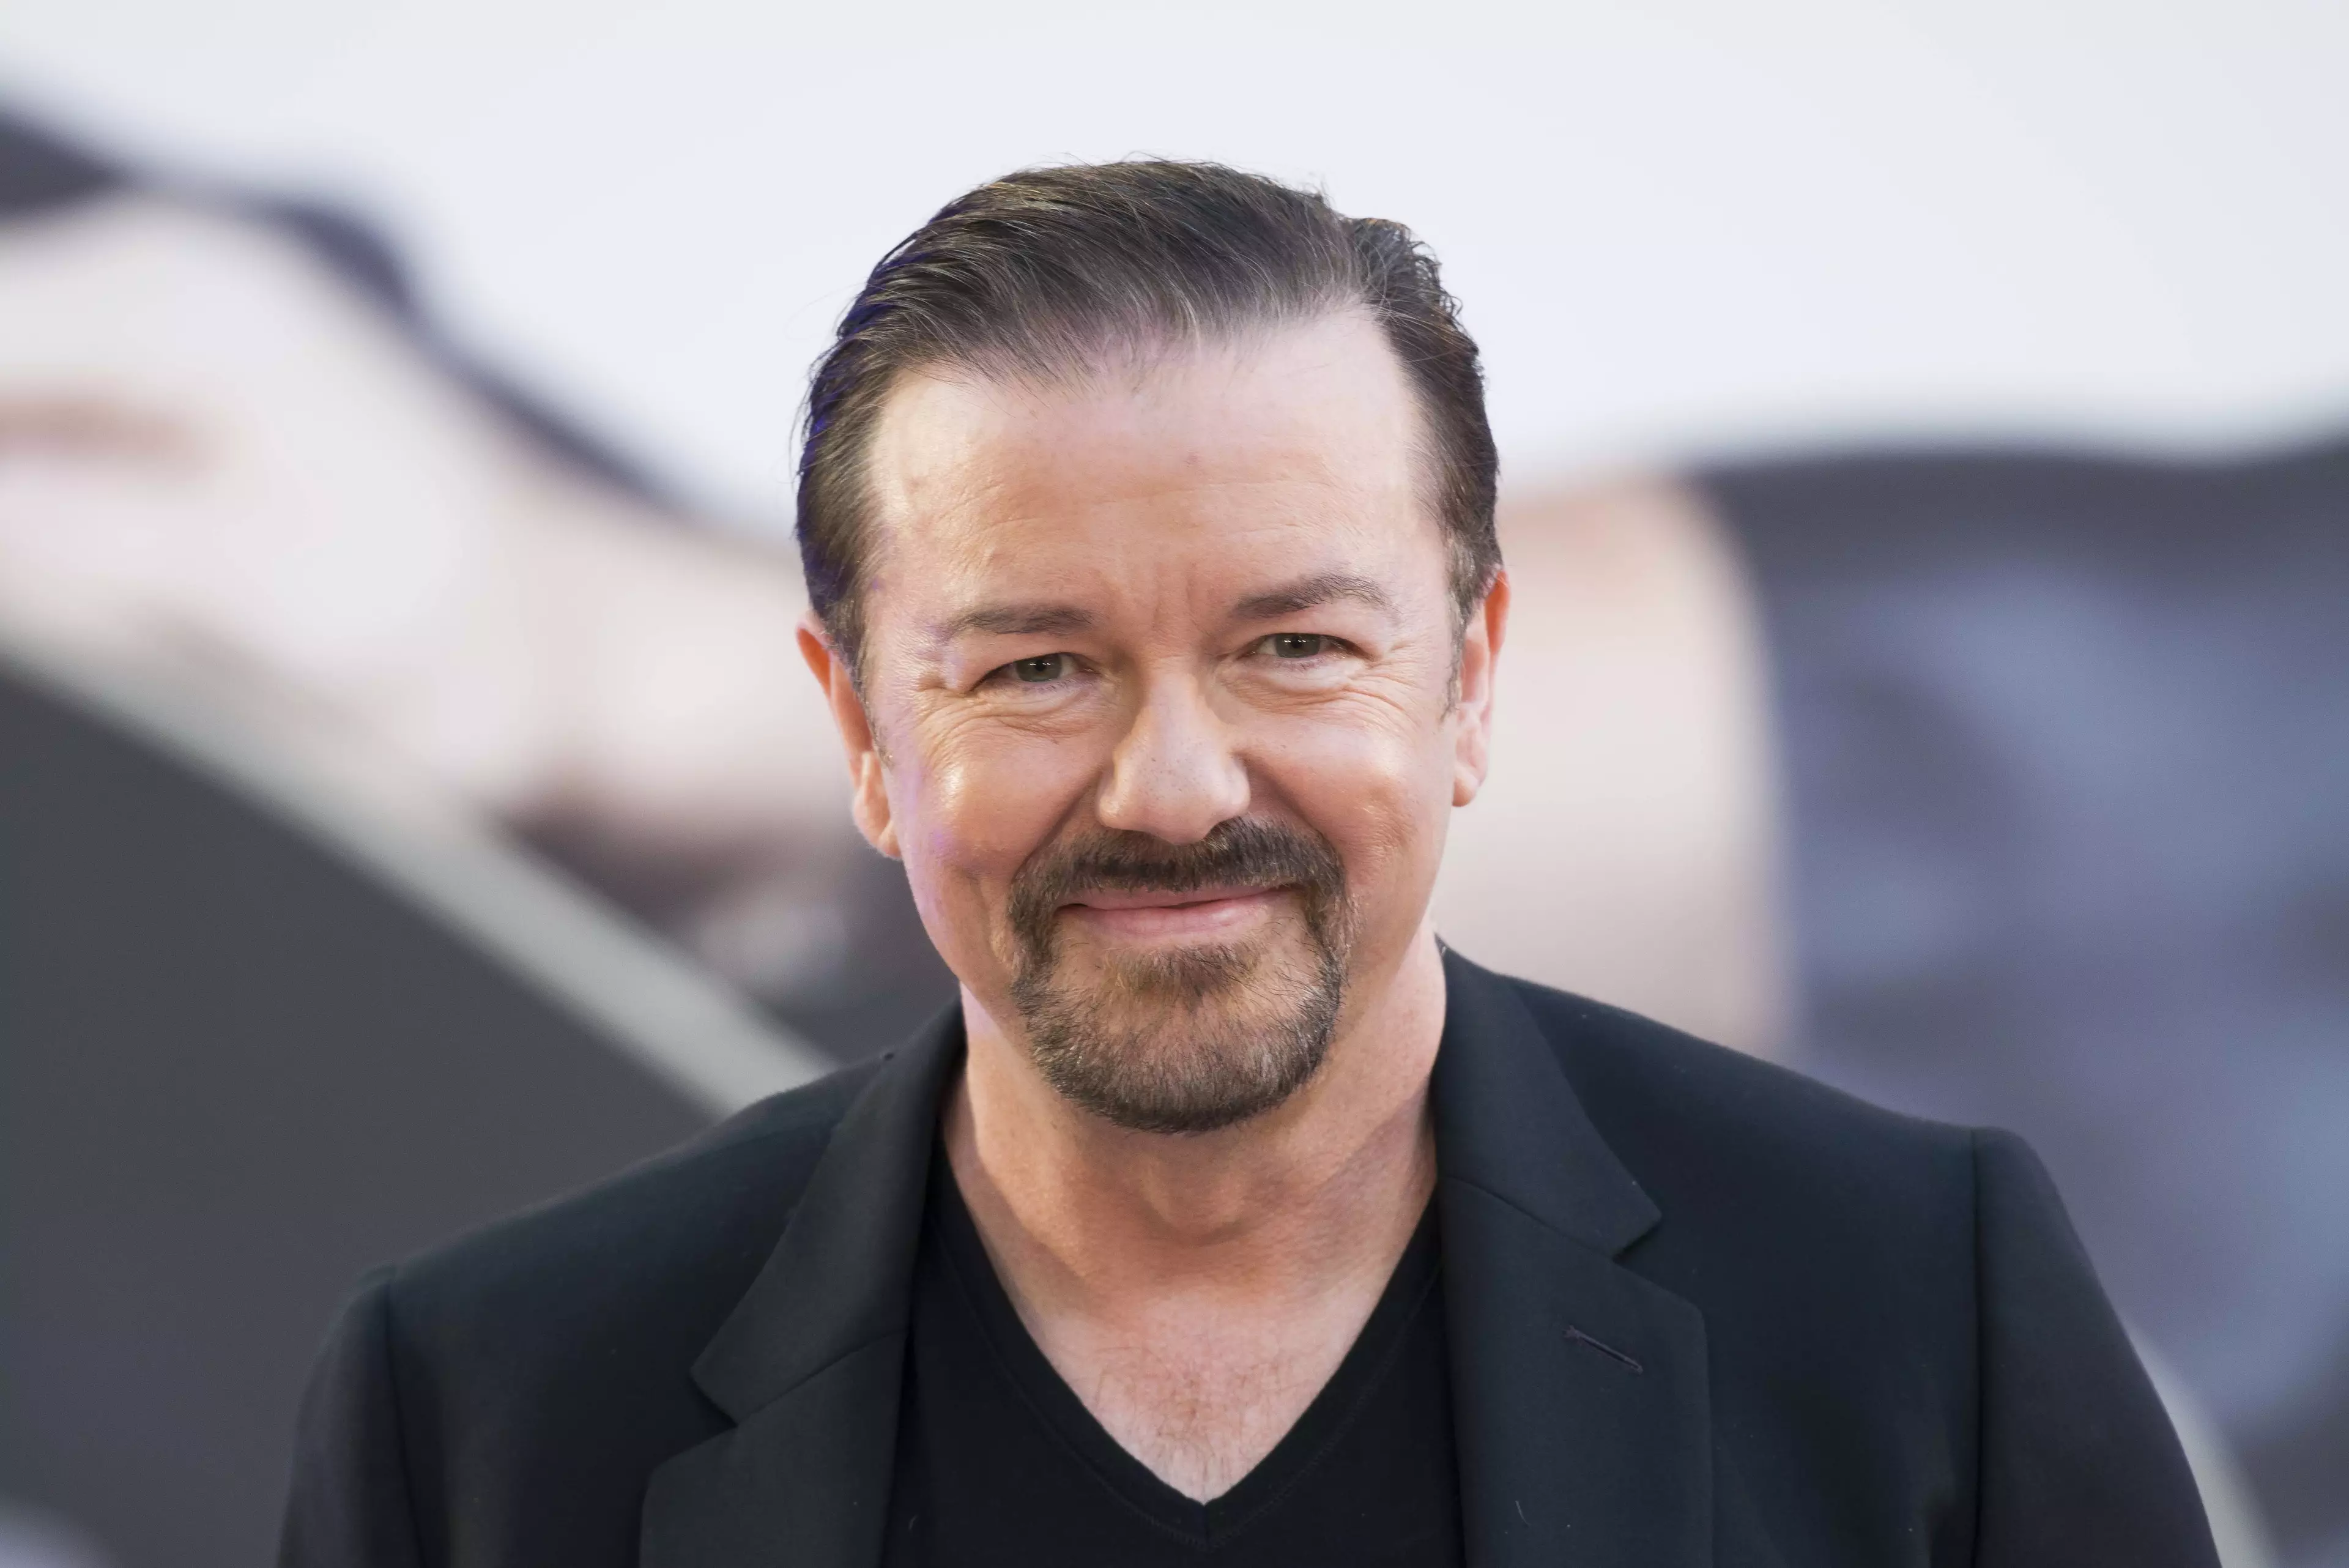 Ricky Gervais first found fame with The Office.